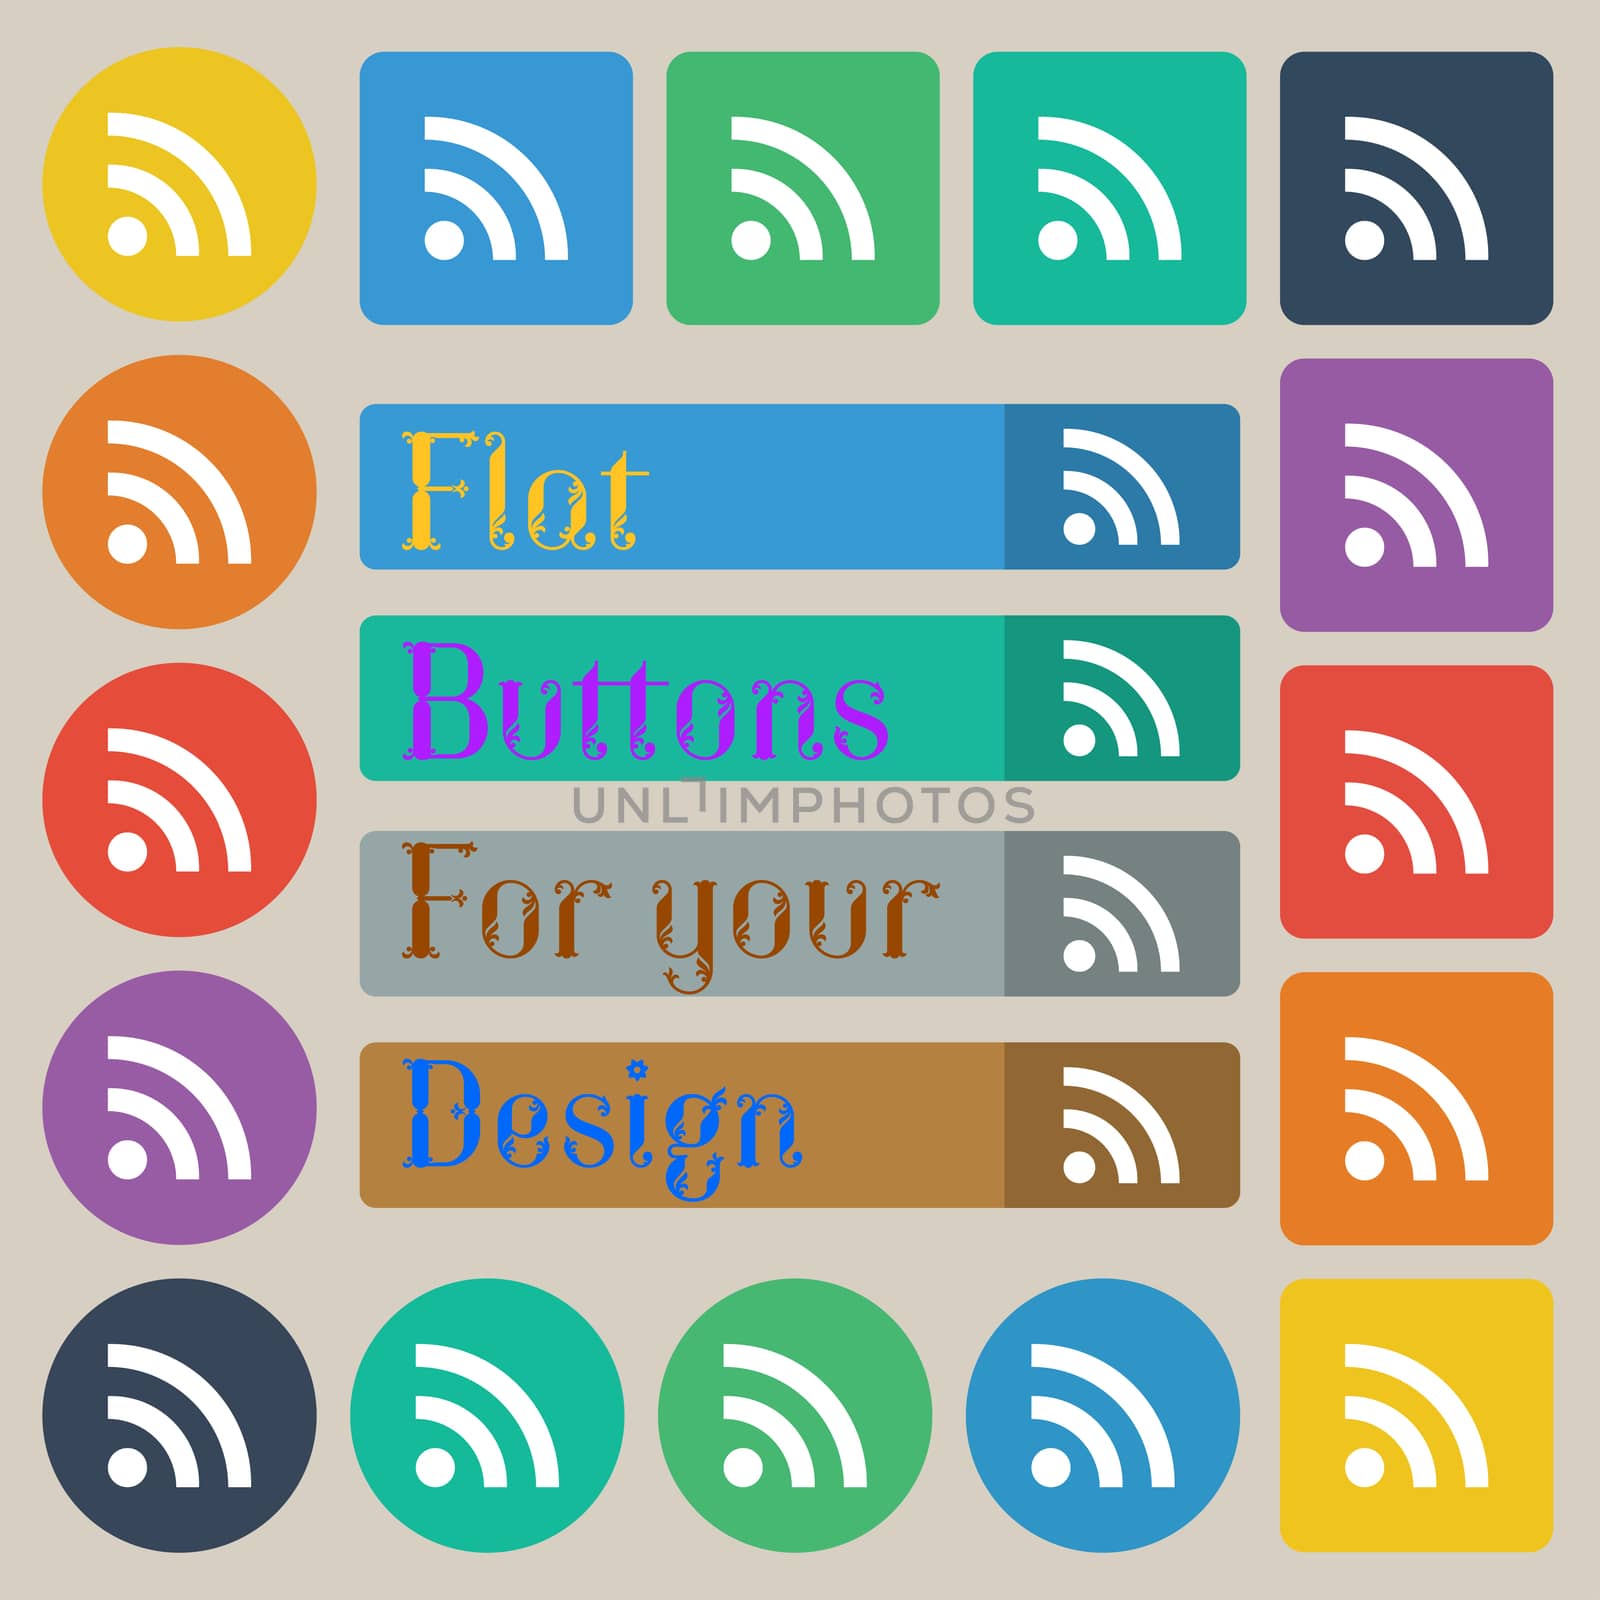 Wifi, Wi-fi, Wireless Network icon sign. Set of twenty colored flat, round, square and rectangular buttons.  by serhii_lohvyniuk